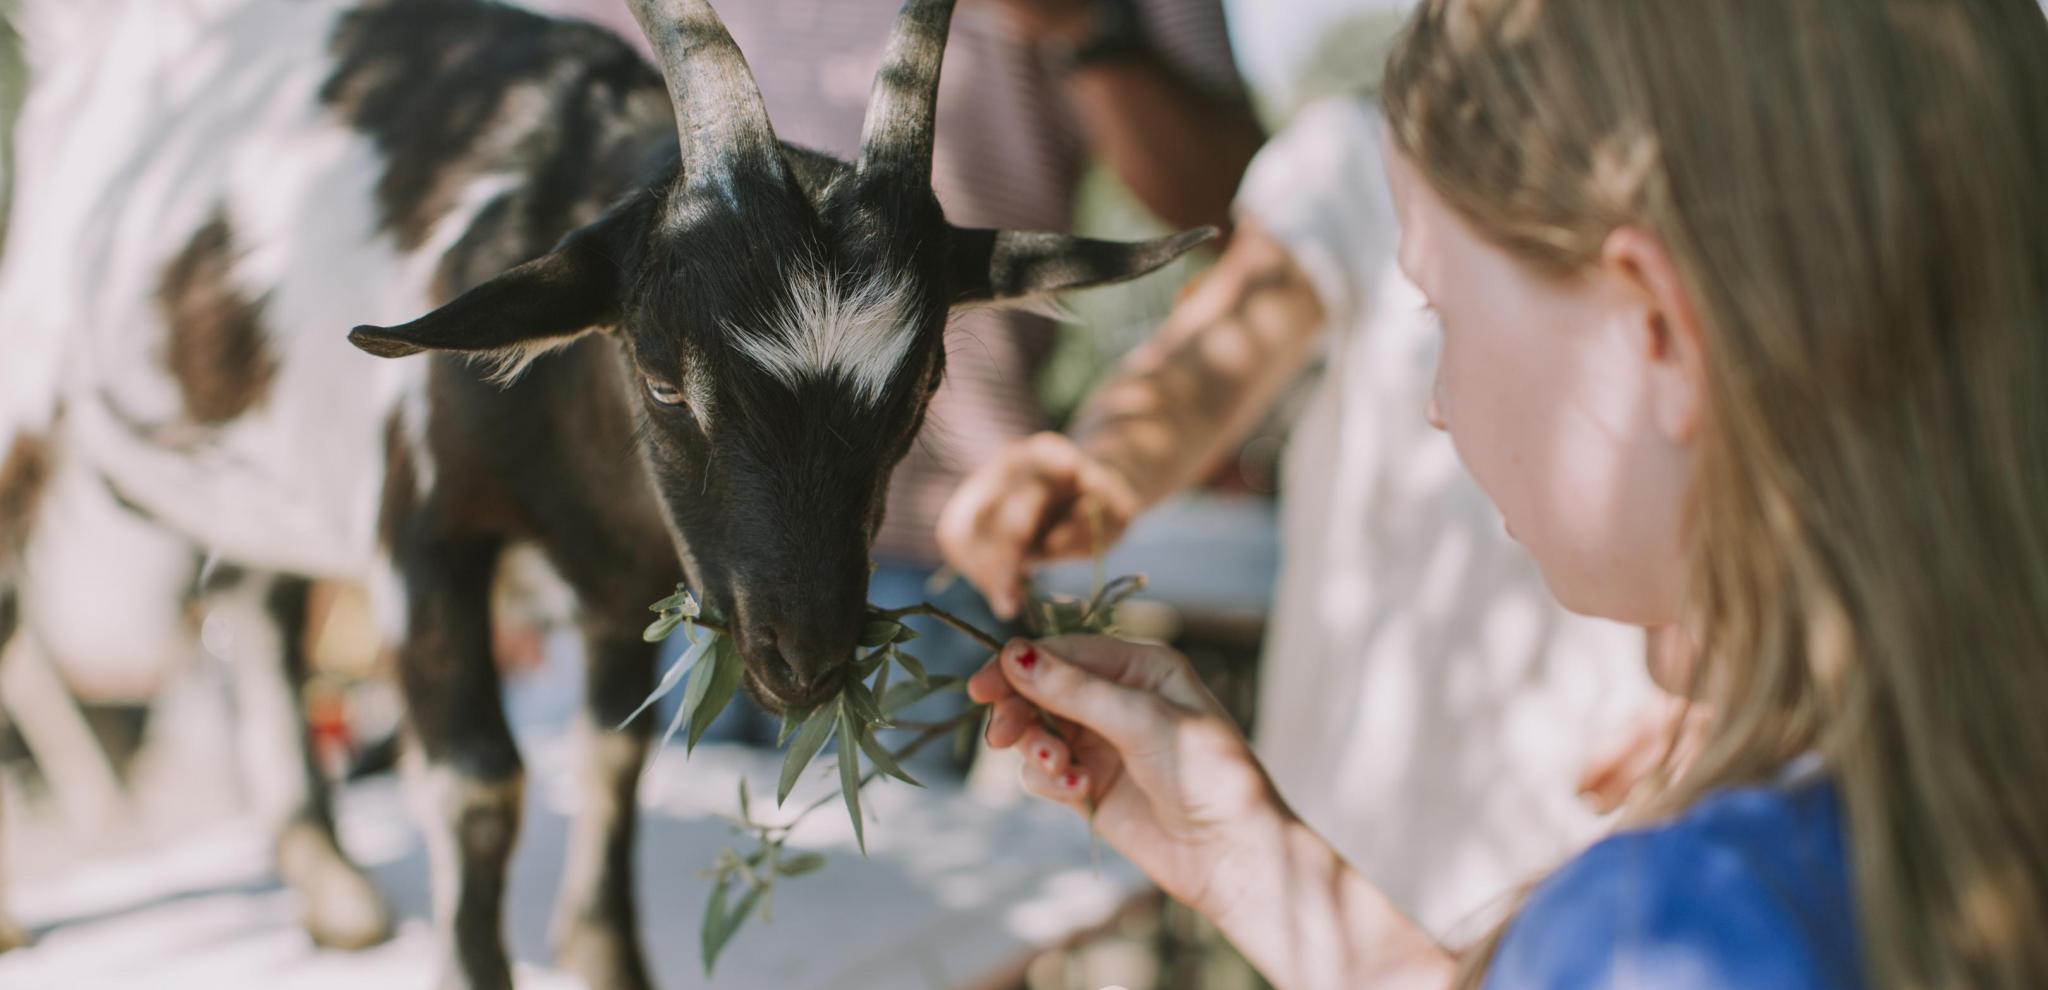 Girl feeding a carrot to a goat